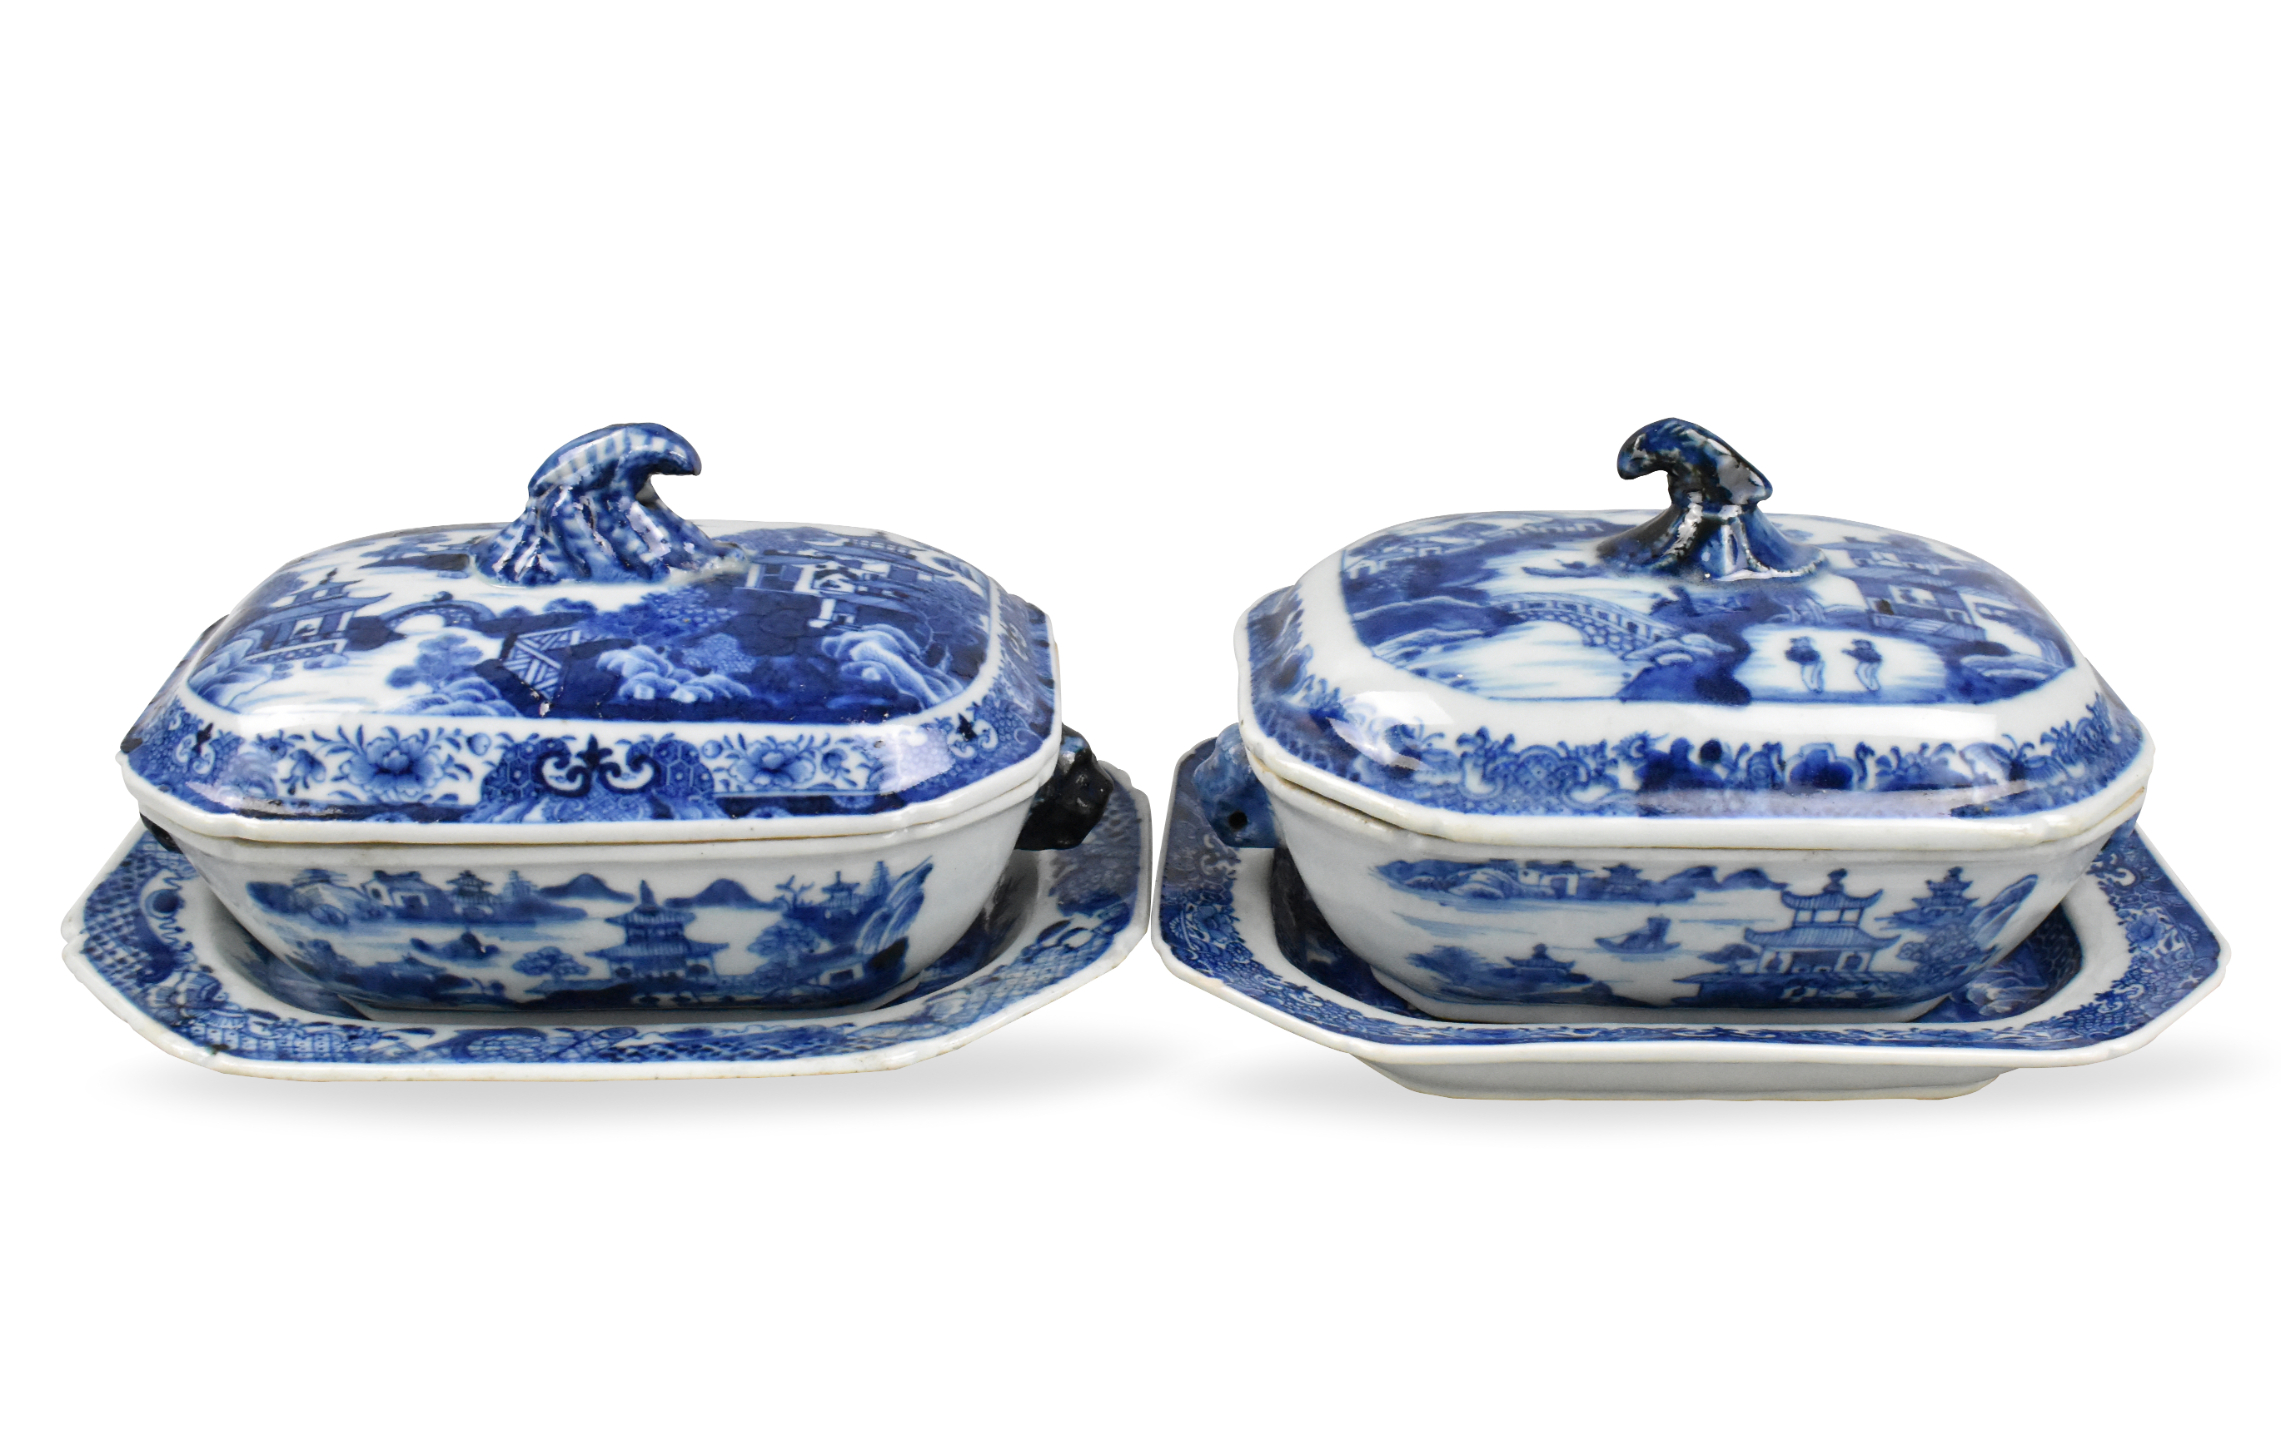 PAIR OF SMALL CHINESE BLUE & WHITE